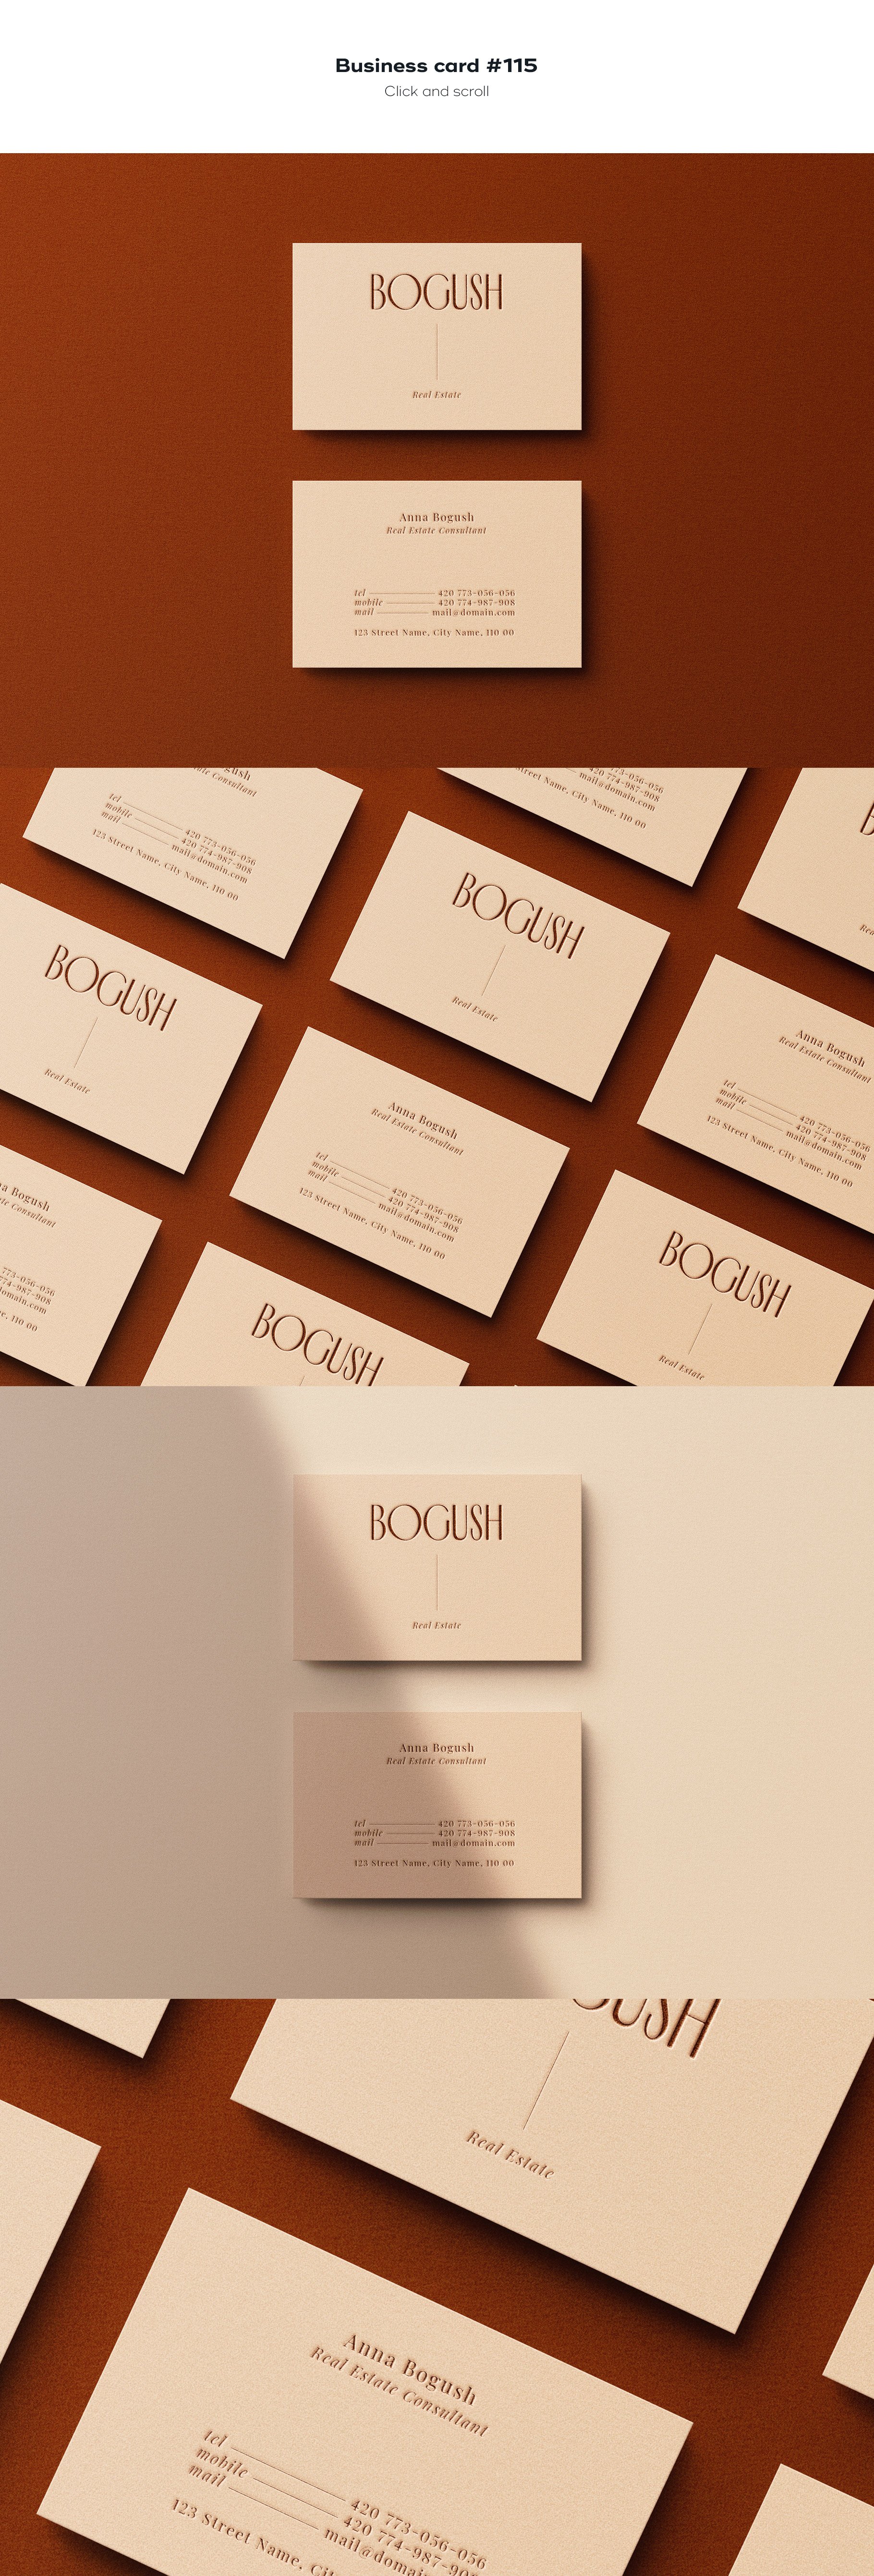 business card 115 299